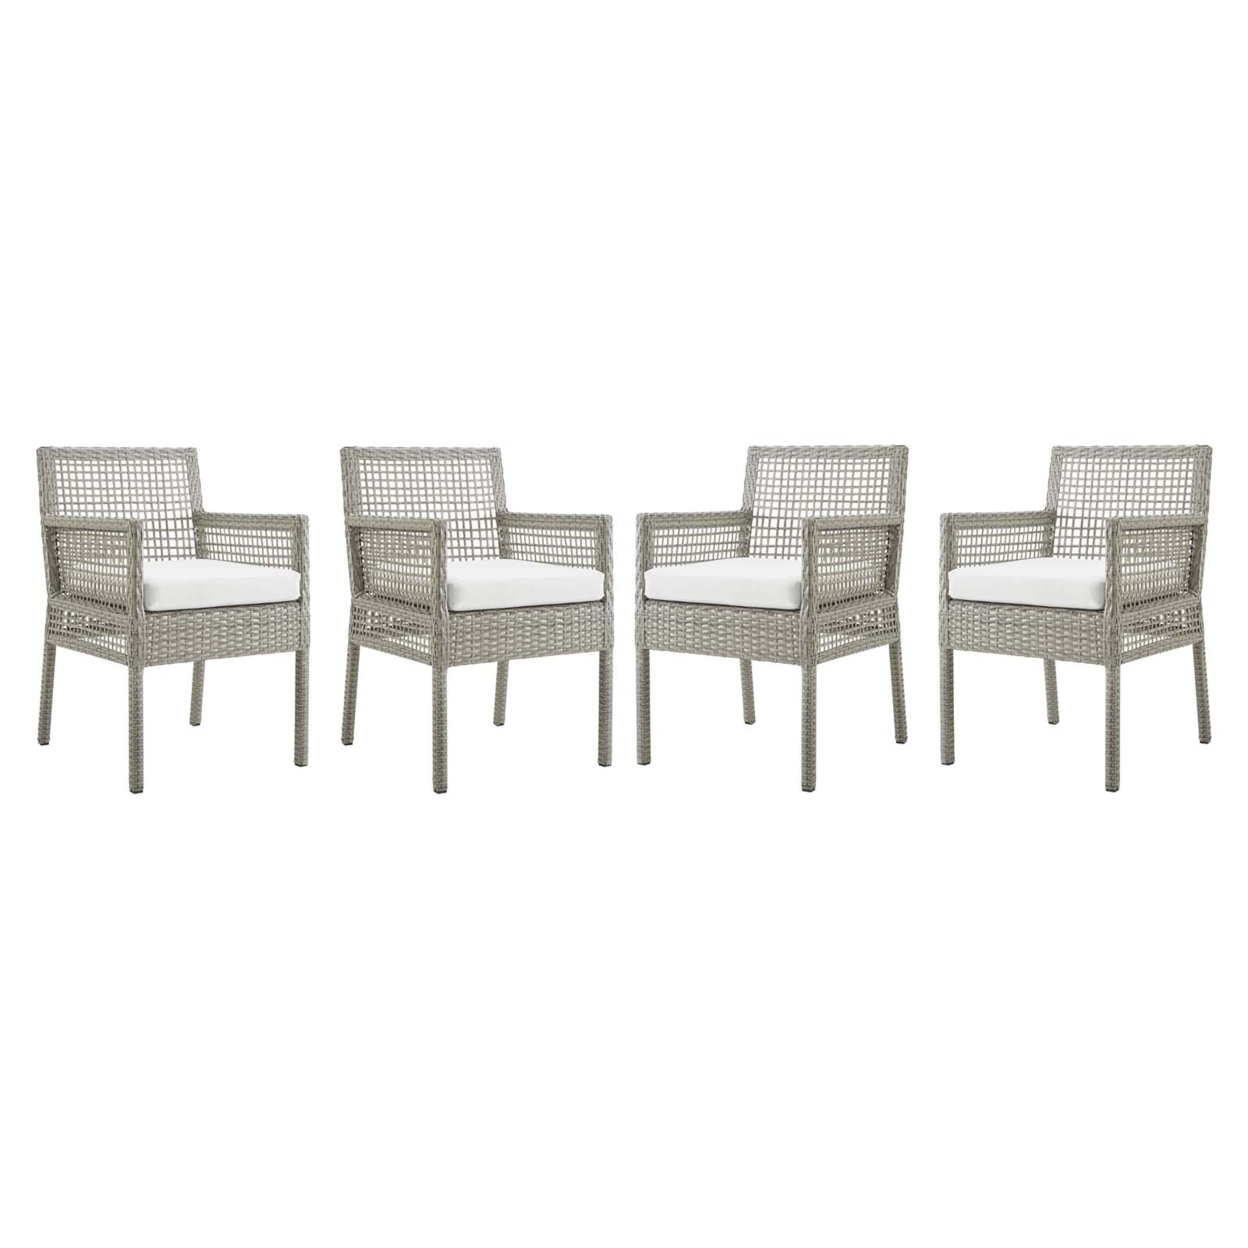 Aura Dining Armchair Outdoor Patio Wicker Rattan Set Of 4,Gray White